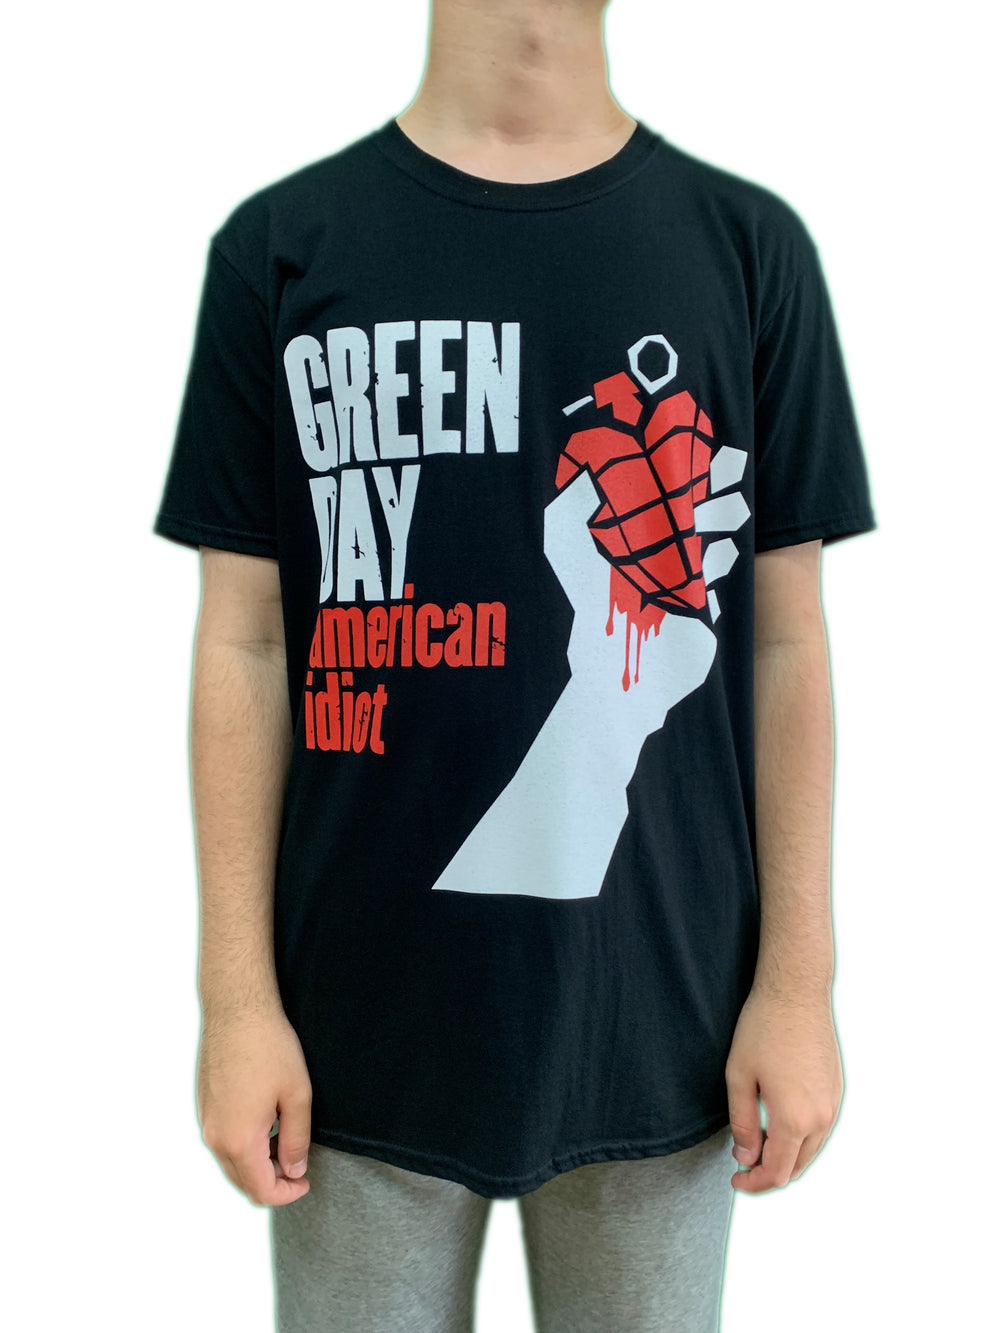 Green Day American Idiot Official Unisex T-Shirt Brand New Various Sizes BLACK SHIRT